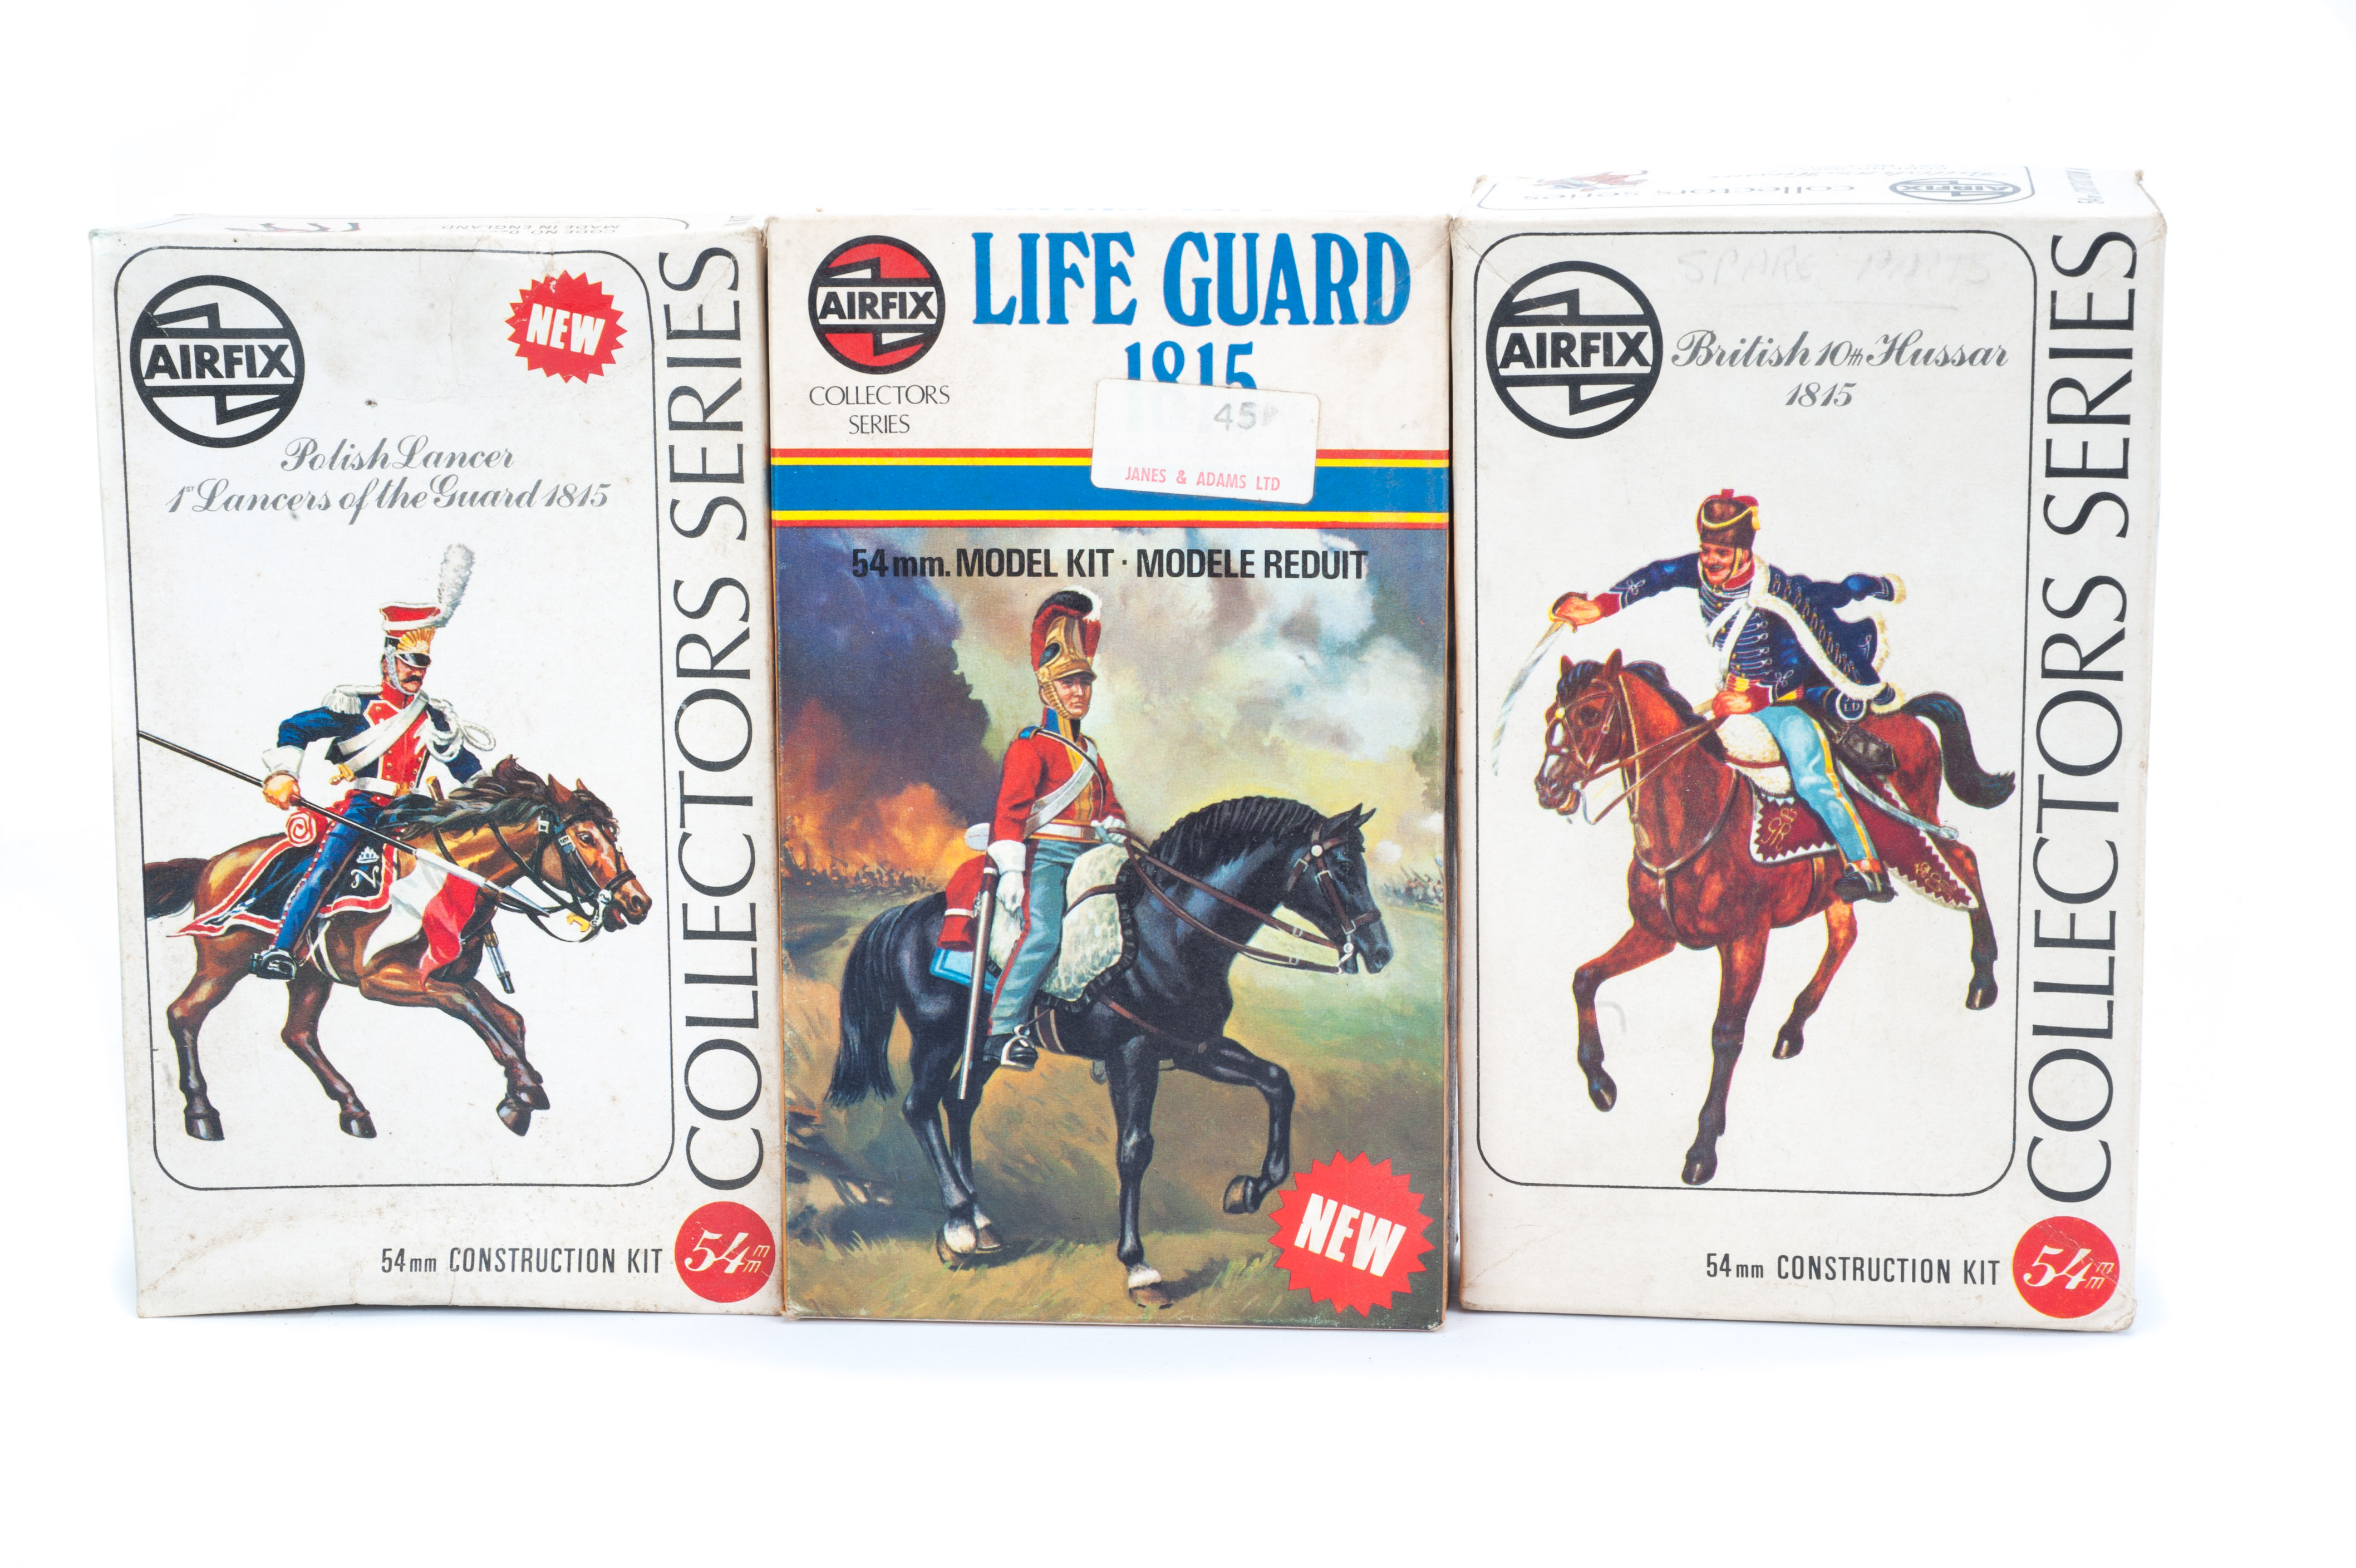 Airfix 54mm Collectors Series Construction Kits, mounted Napoleonic figures, all seem to be